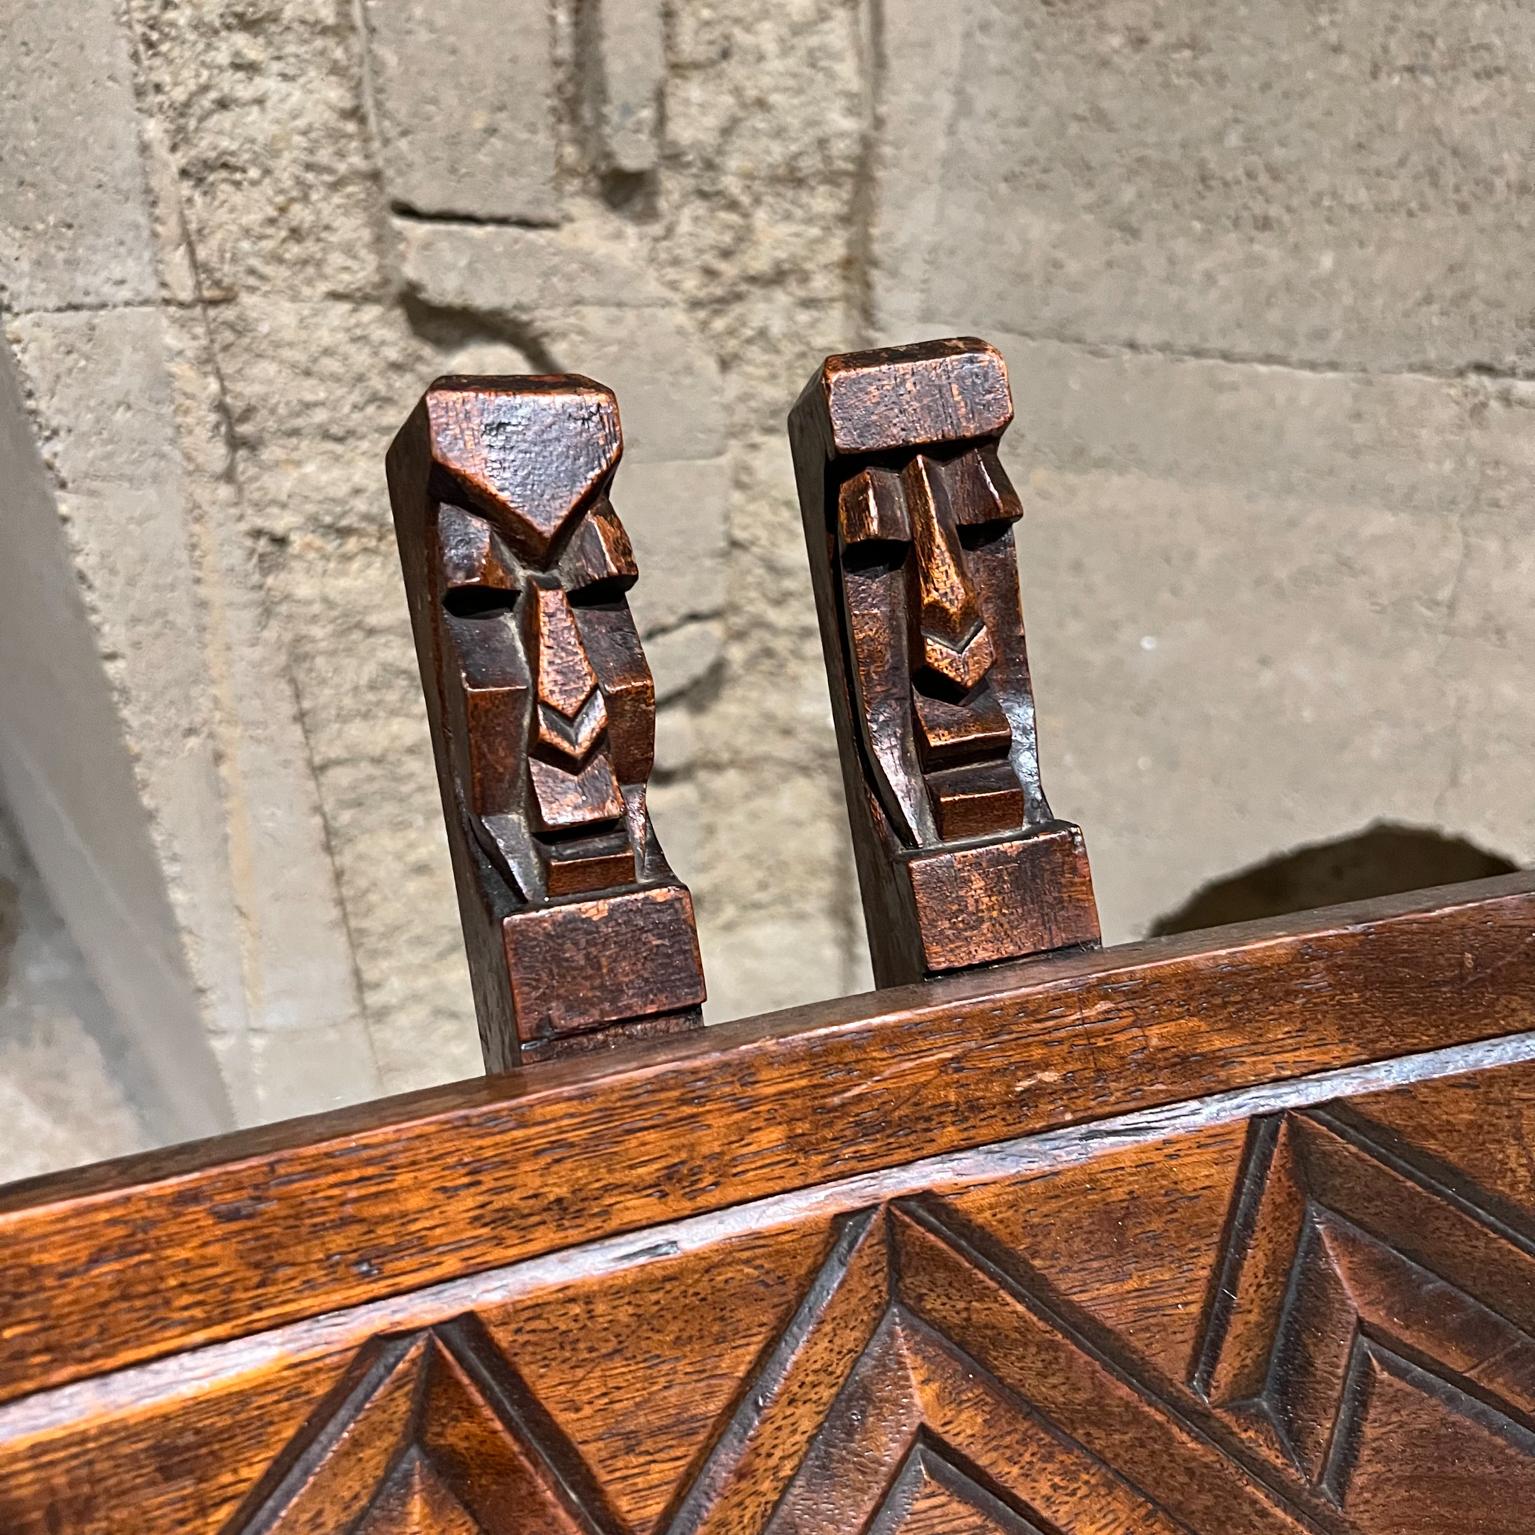 1960s African Ceremonial Chief Chairs Hand Carved Wood In Good Condition For Sale In Chula Vista, CA